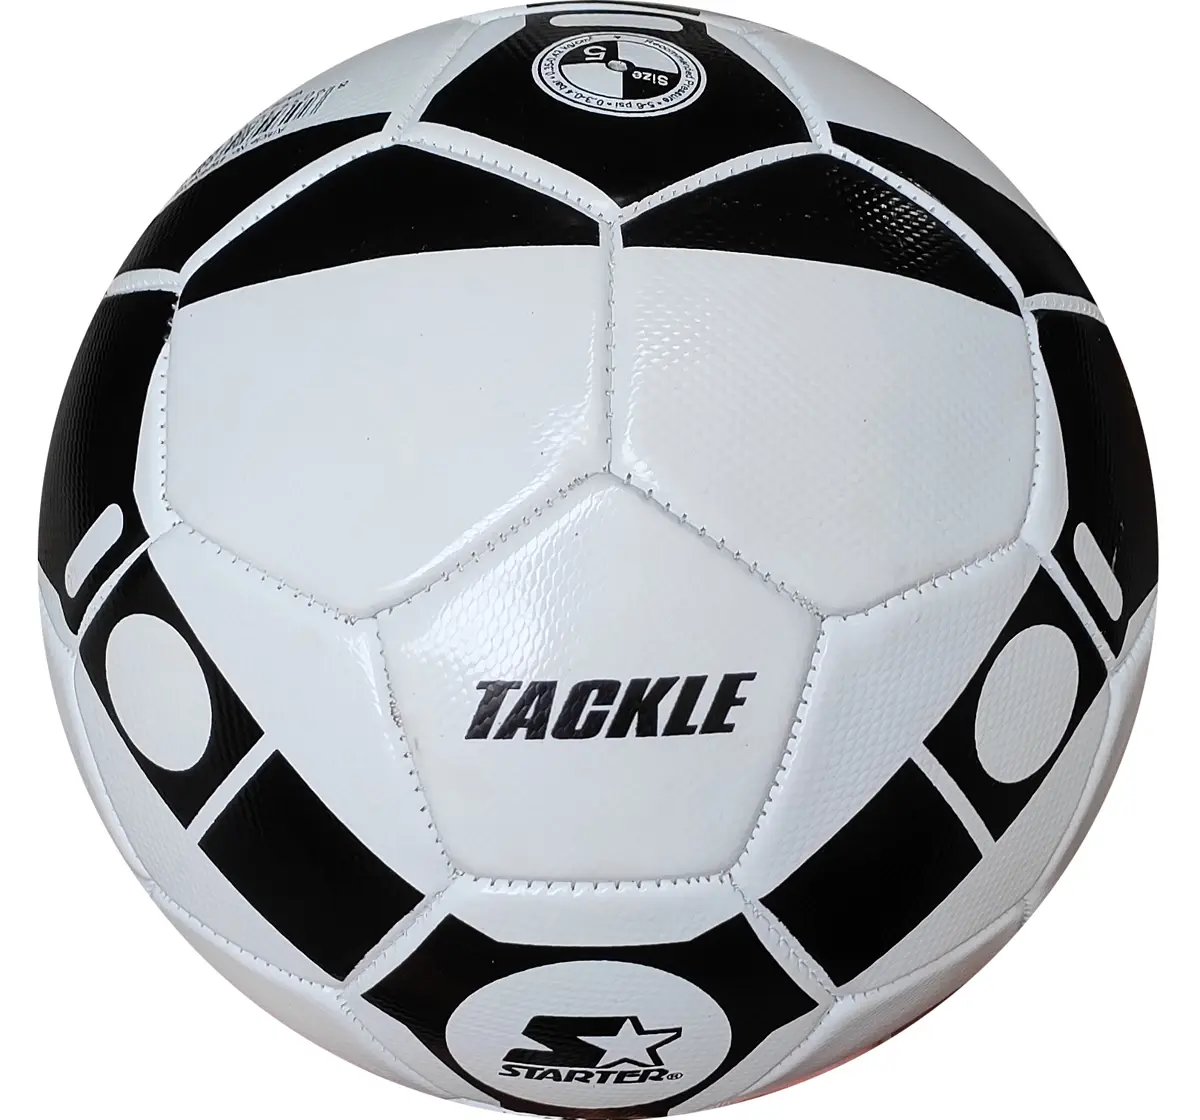 Tackle Football Starter L1 Size 5 - White